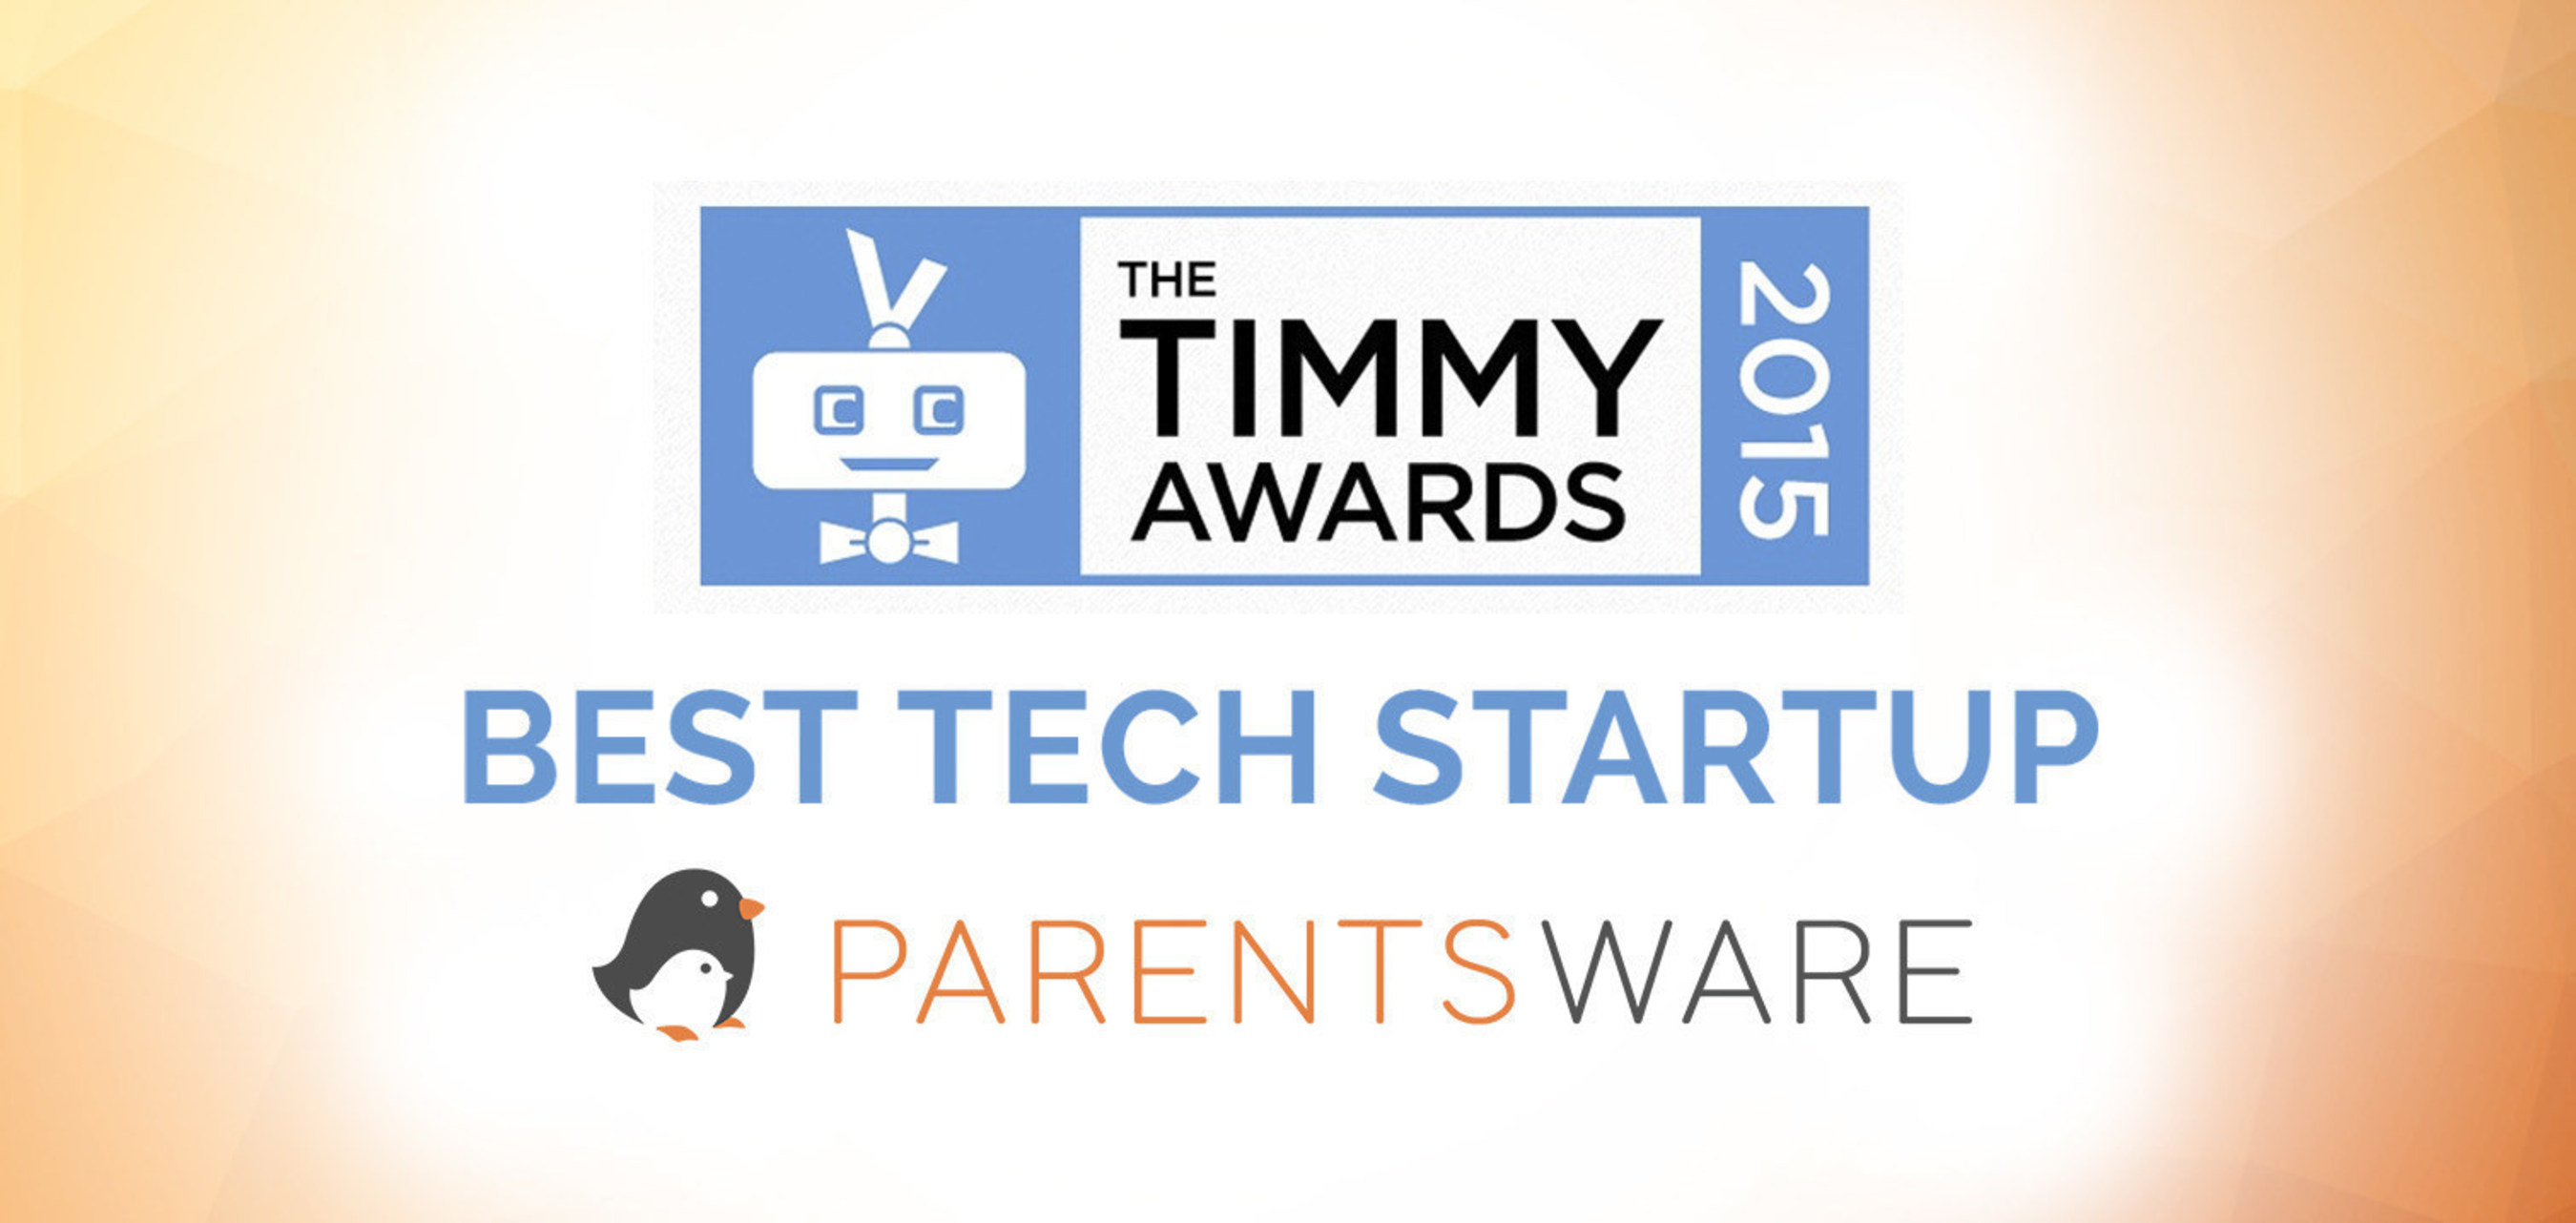 ParentsWare, Inc wins Best Tech Startup for OurPact application.